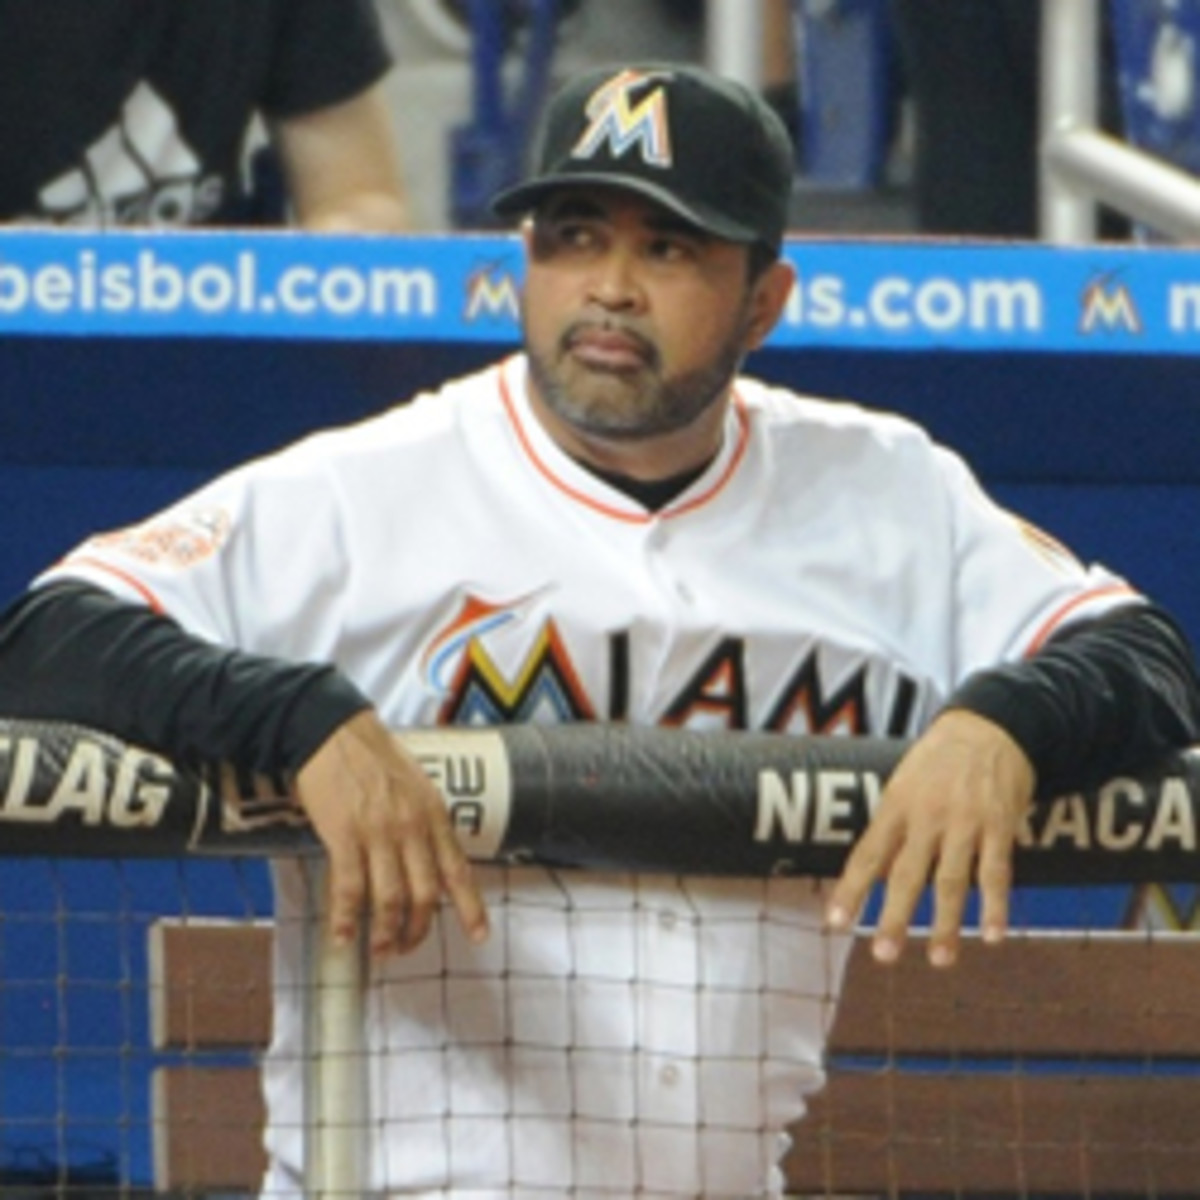 Miami Marlins Manager Ozzie Guillen comes off the mound at the new Miami  Marlins Ball Park in the second exhibition game against the New York  Yankees April 2, 2012, in Miami, Florida.